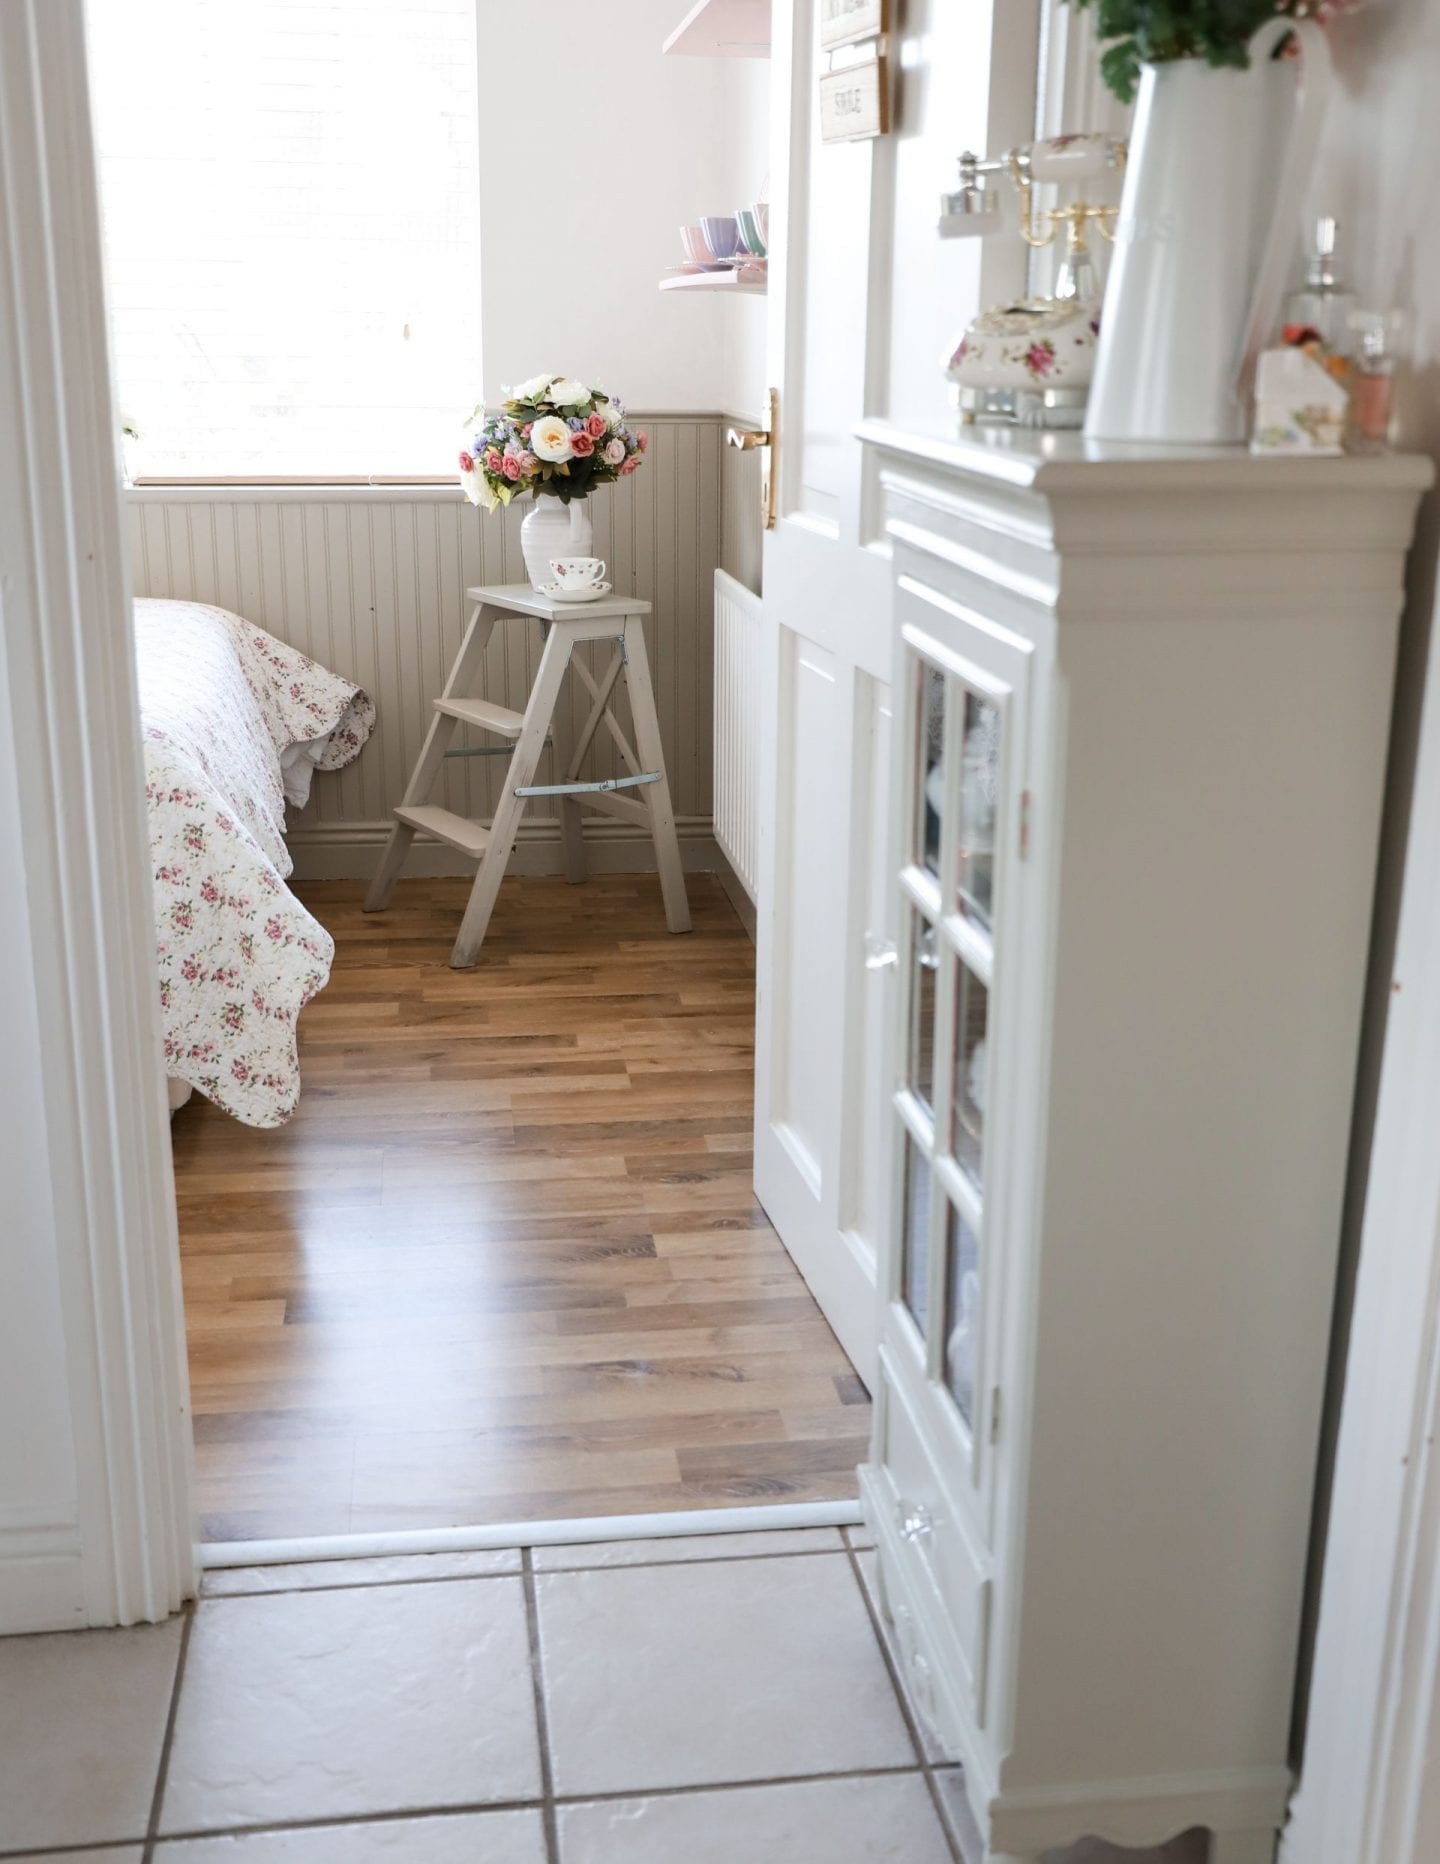 How to install beadboard panelling to a room